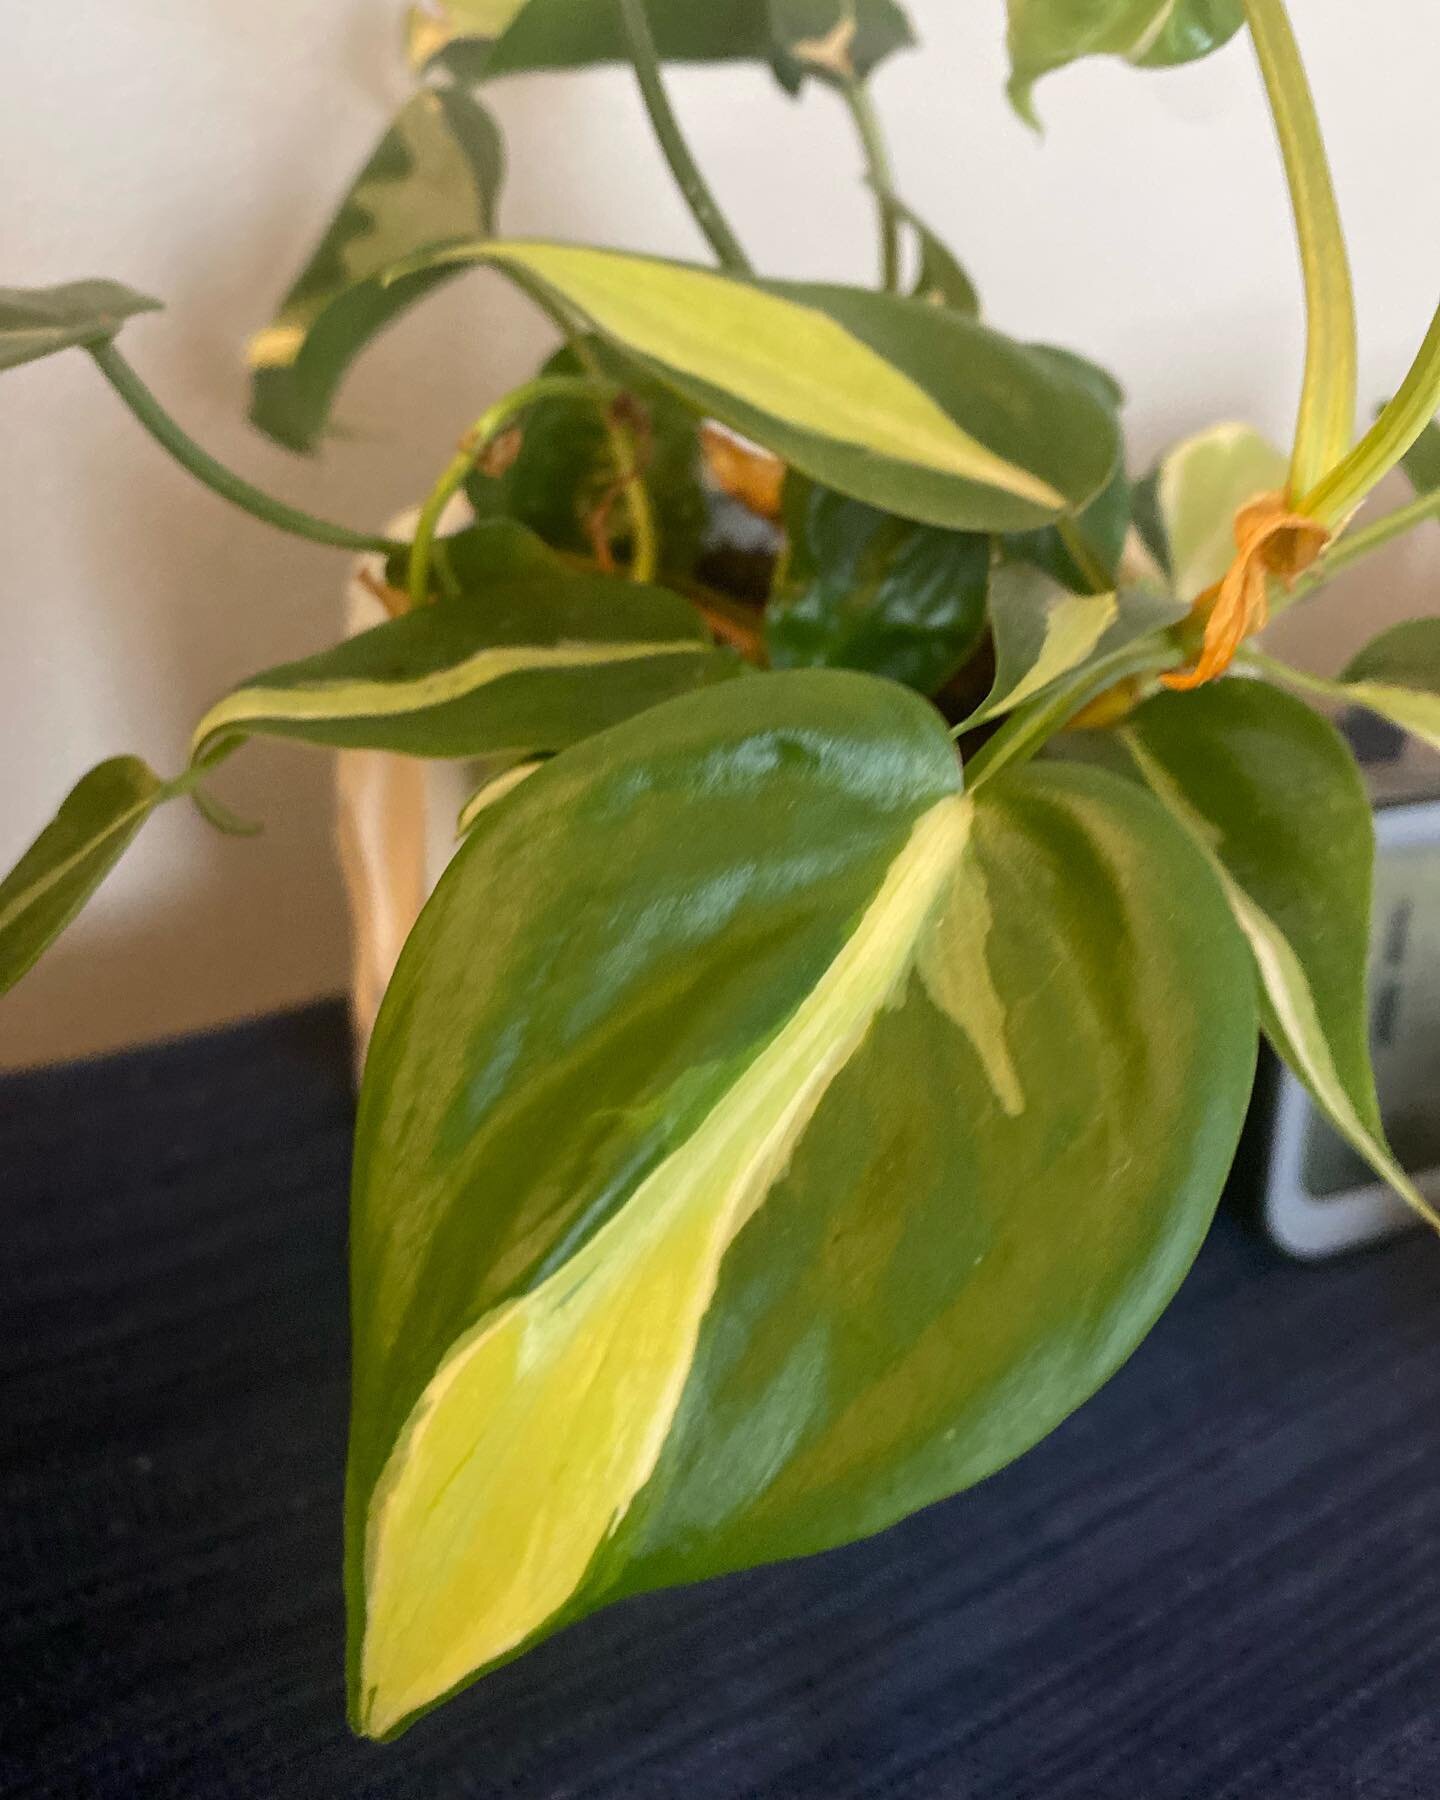 Brought this cutie into the studio to live. Philodendron cream splash, cousin to the Philodendron Brasil and Rio&hellip;.I love the variegation. My clients love the jungle in the studio and comment on how relaxing it is. What do you think?
*
*
*Follo